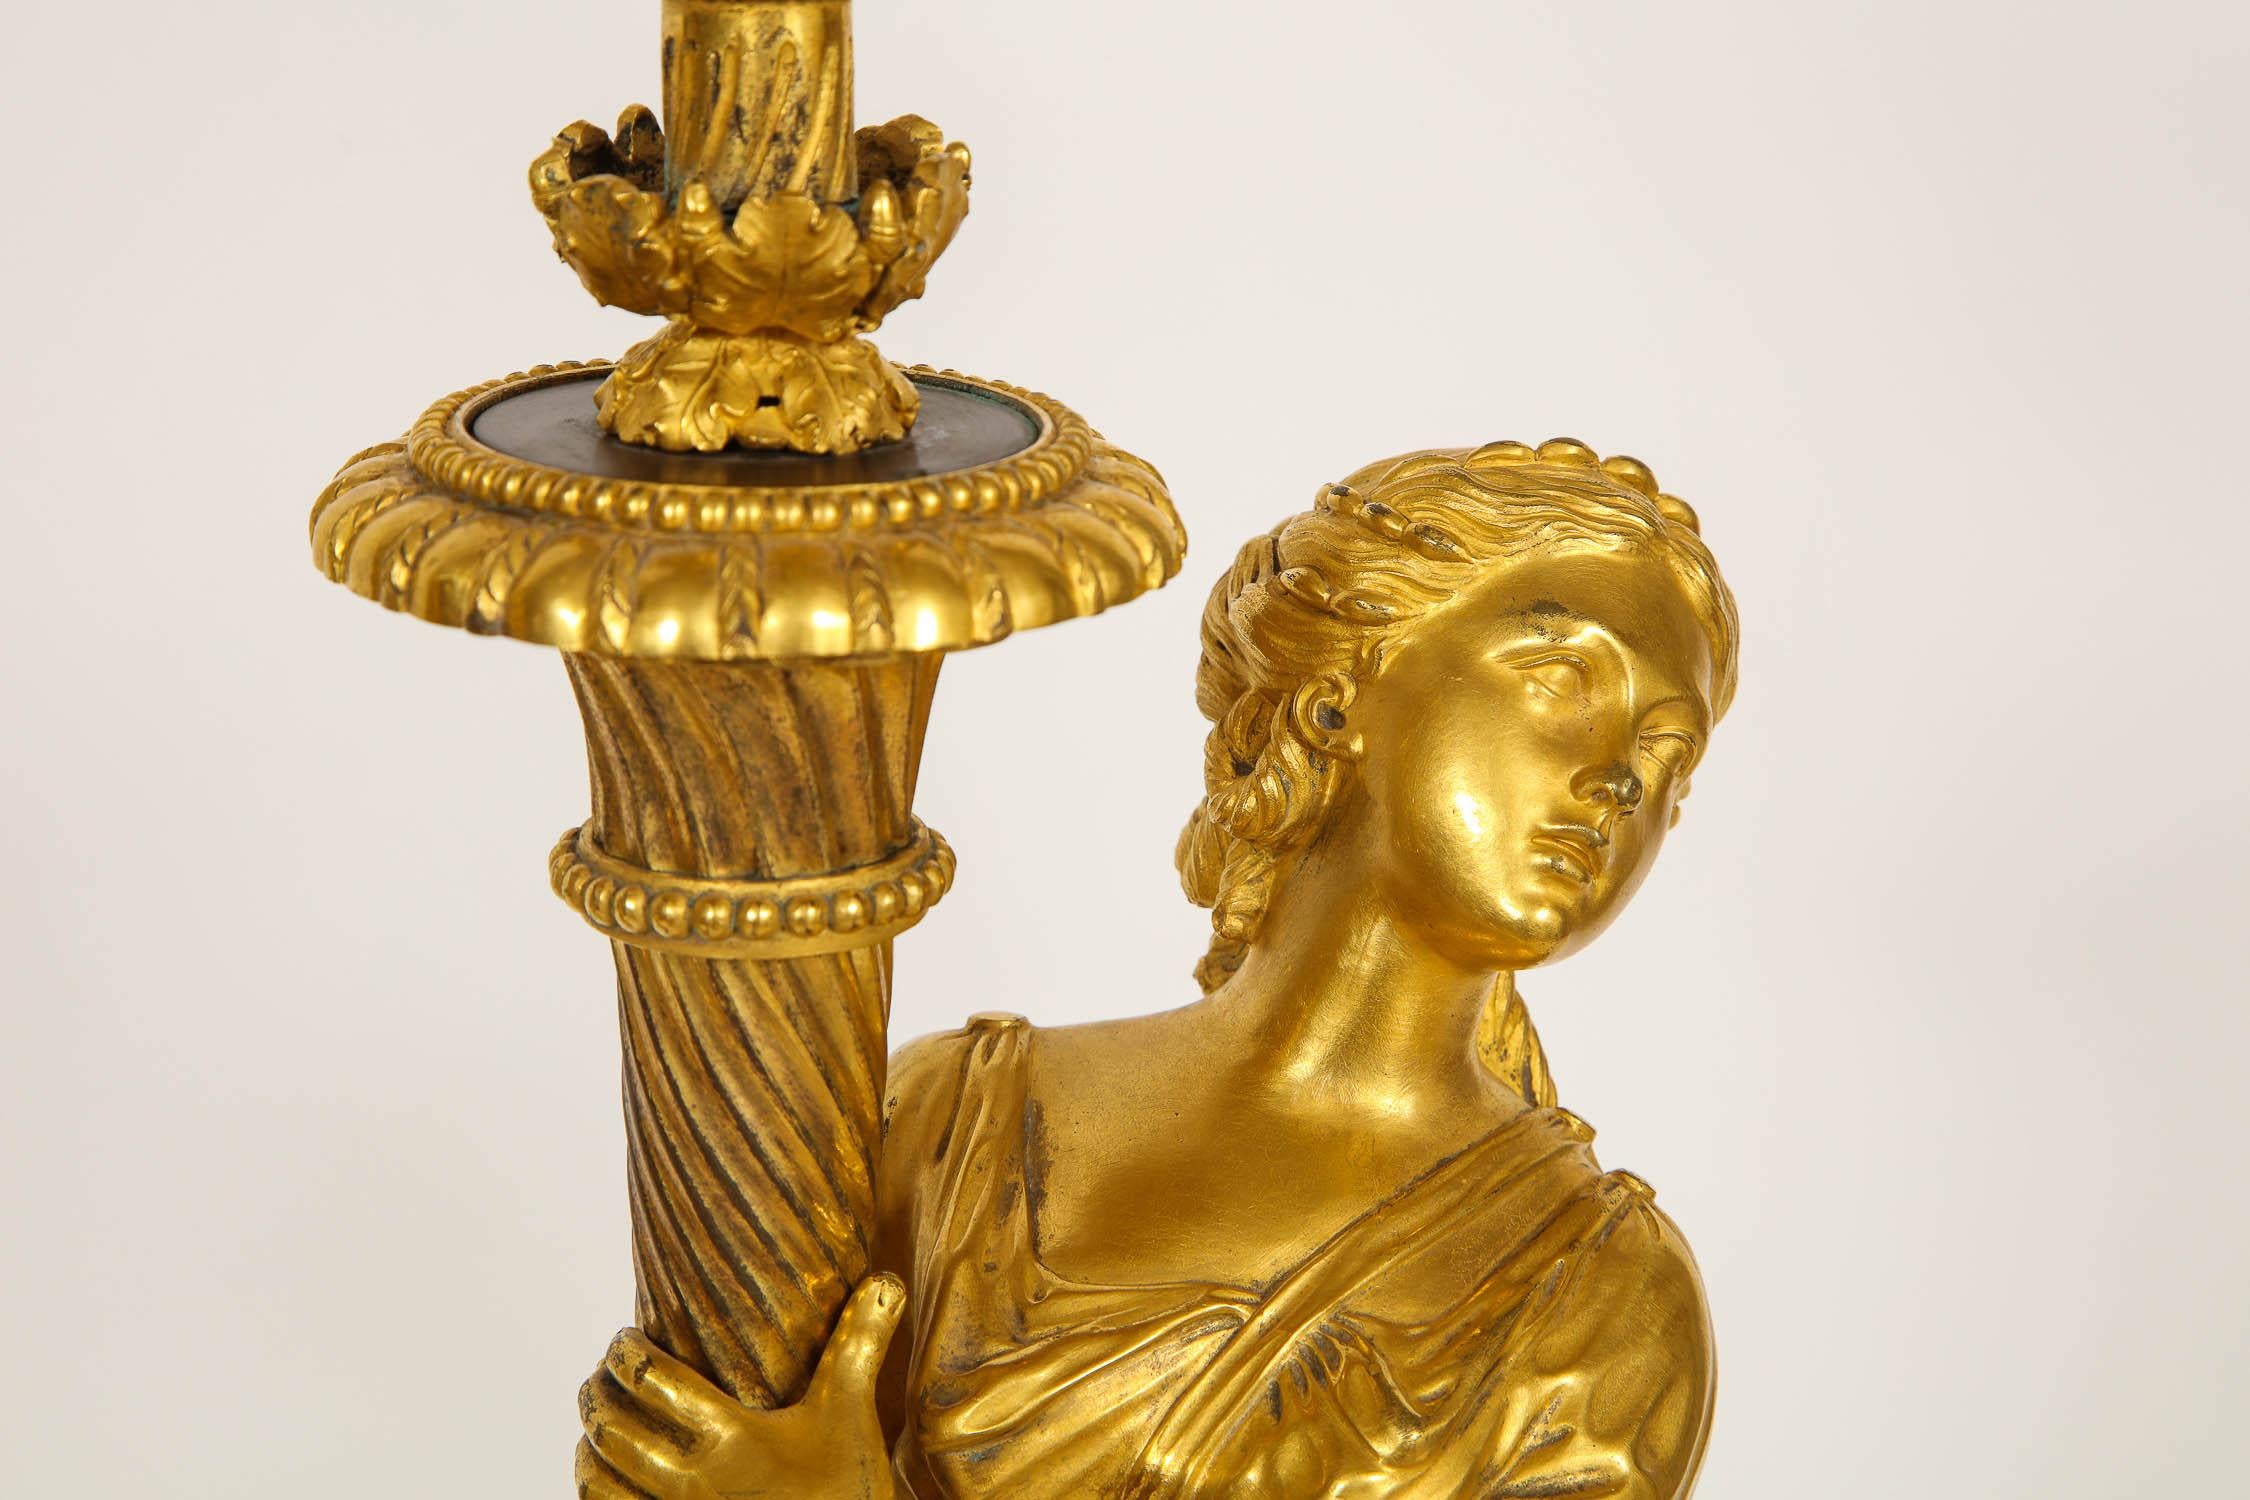 Late 18th Century Pair of 18th Century Louis XVI Period Gilt-Bronze Figures of Maidens as Lamps For Sale